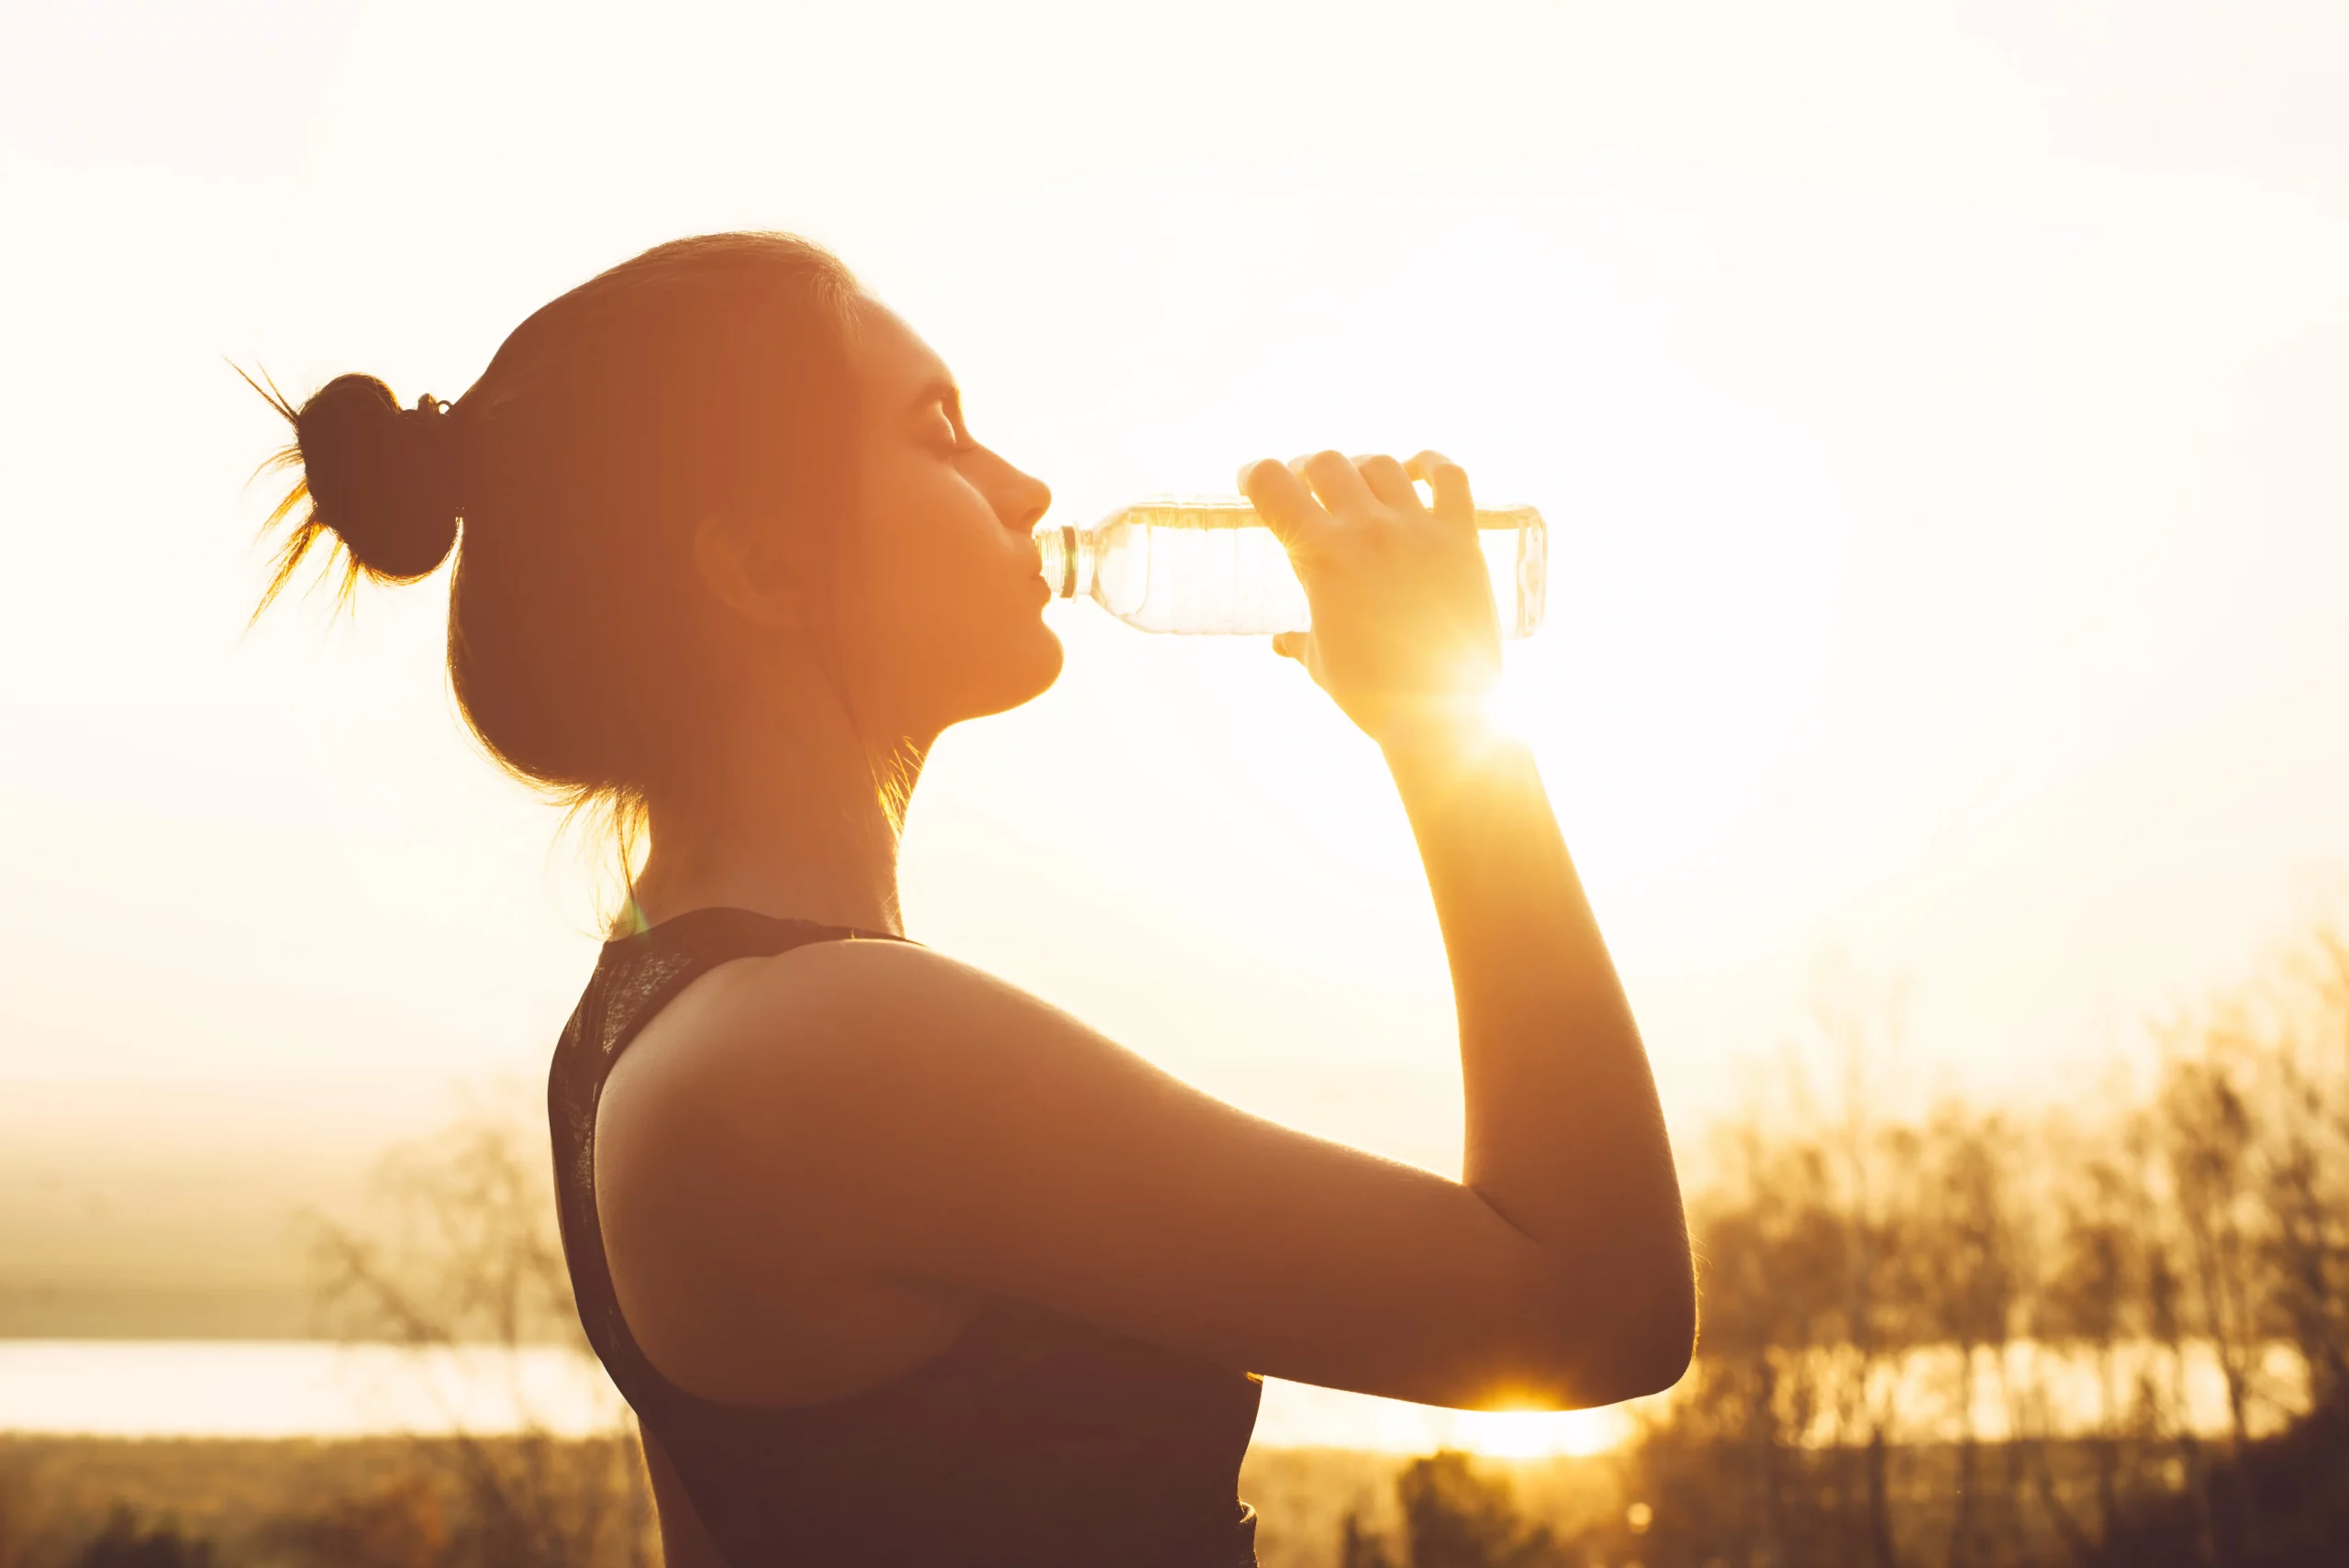 Water, Soda, or Something Else? Your Guide to Healthy Hydration